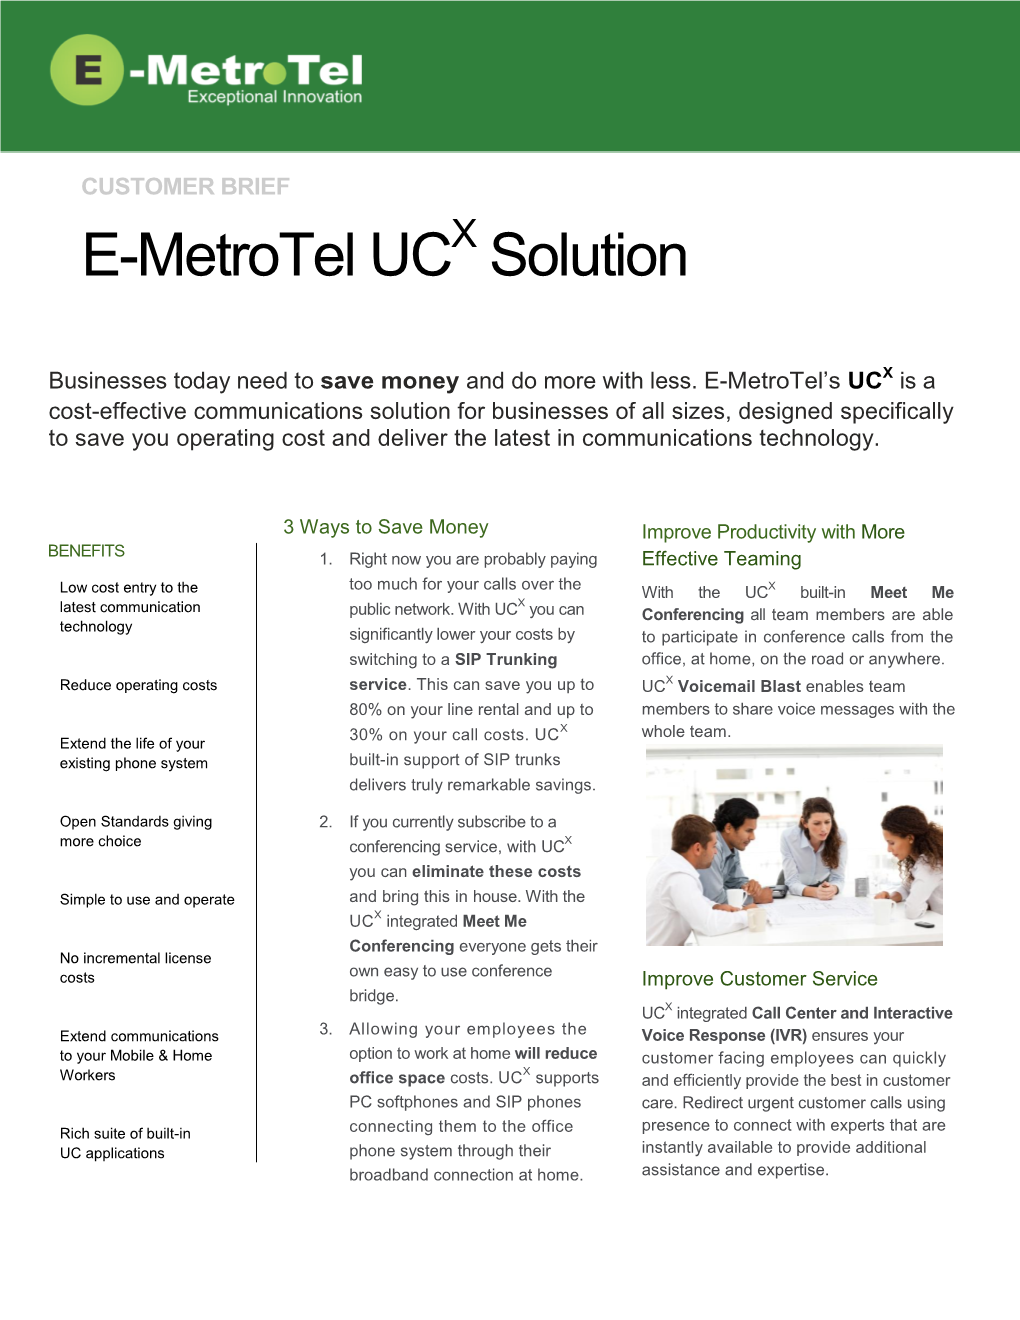 E-Metrotel UC Solution